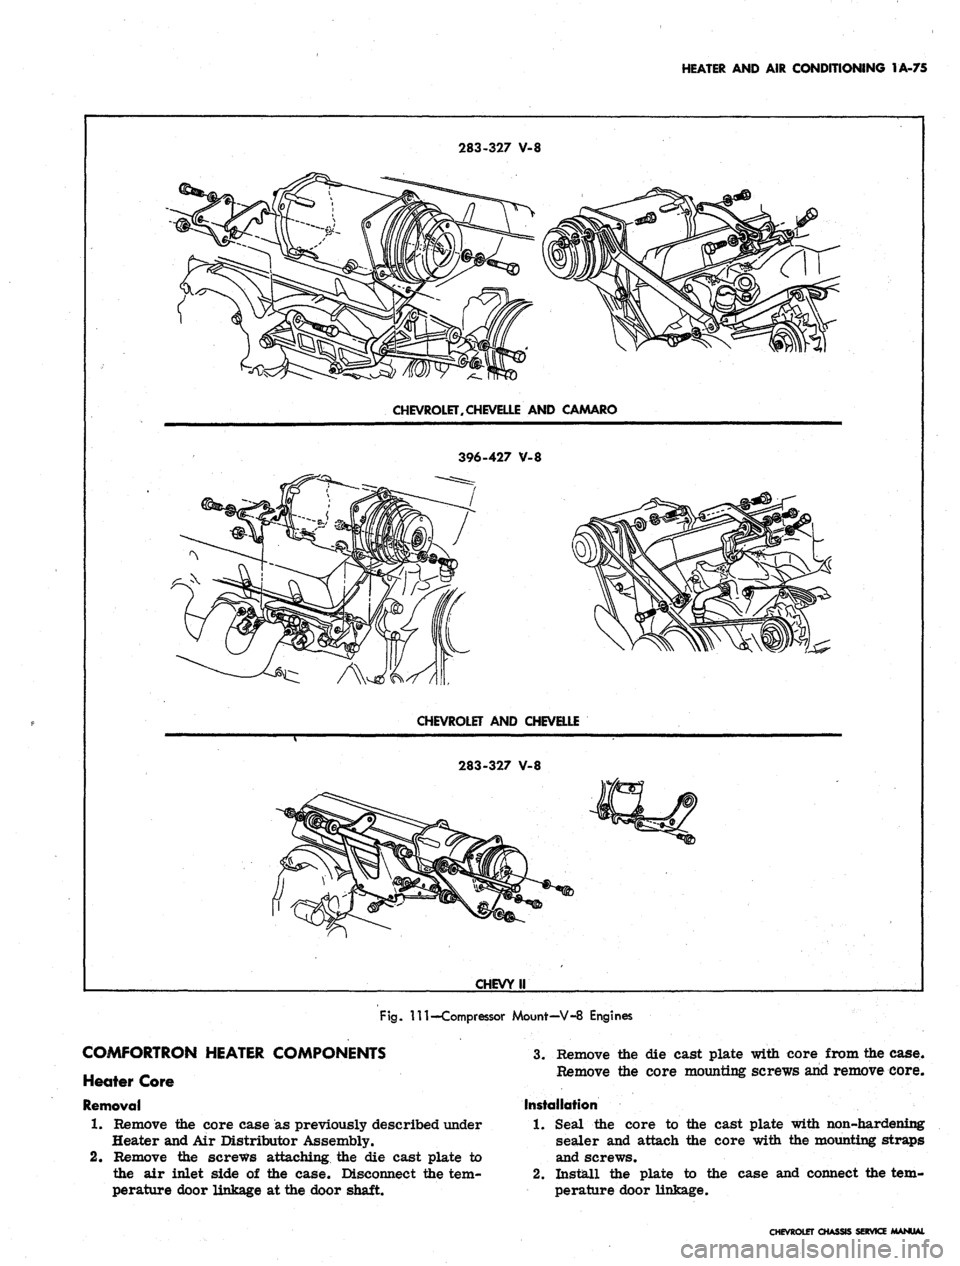 CHEVROLET CAMARO 1967 1.G Chassis Service Manual 
HEATER AND AIR CONDITIONING 1A-75

283-327 V-8

CHEVROLET, CHEVELLE AND CAMARO

396-427 V-8

CHEVROLET AND CHEVELLE

283-327 V-8

CHEVY II

Fig.
 Ill—Compressor Mount—V-8 Engines

COMFORTRON HEAT